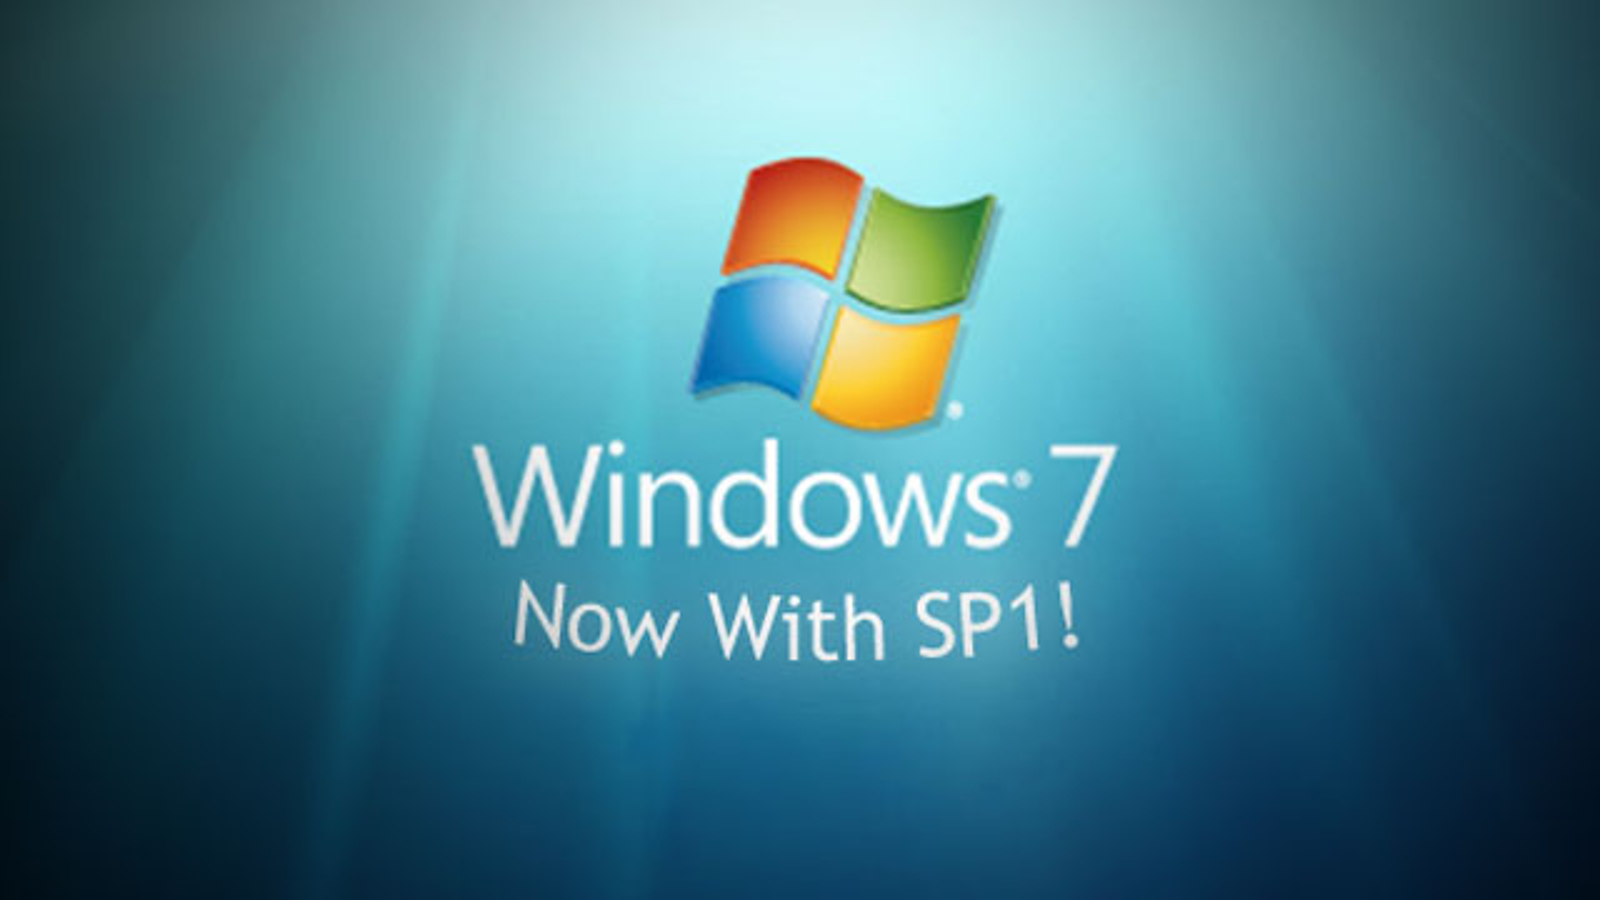 service pack 1 windows 7 download